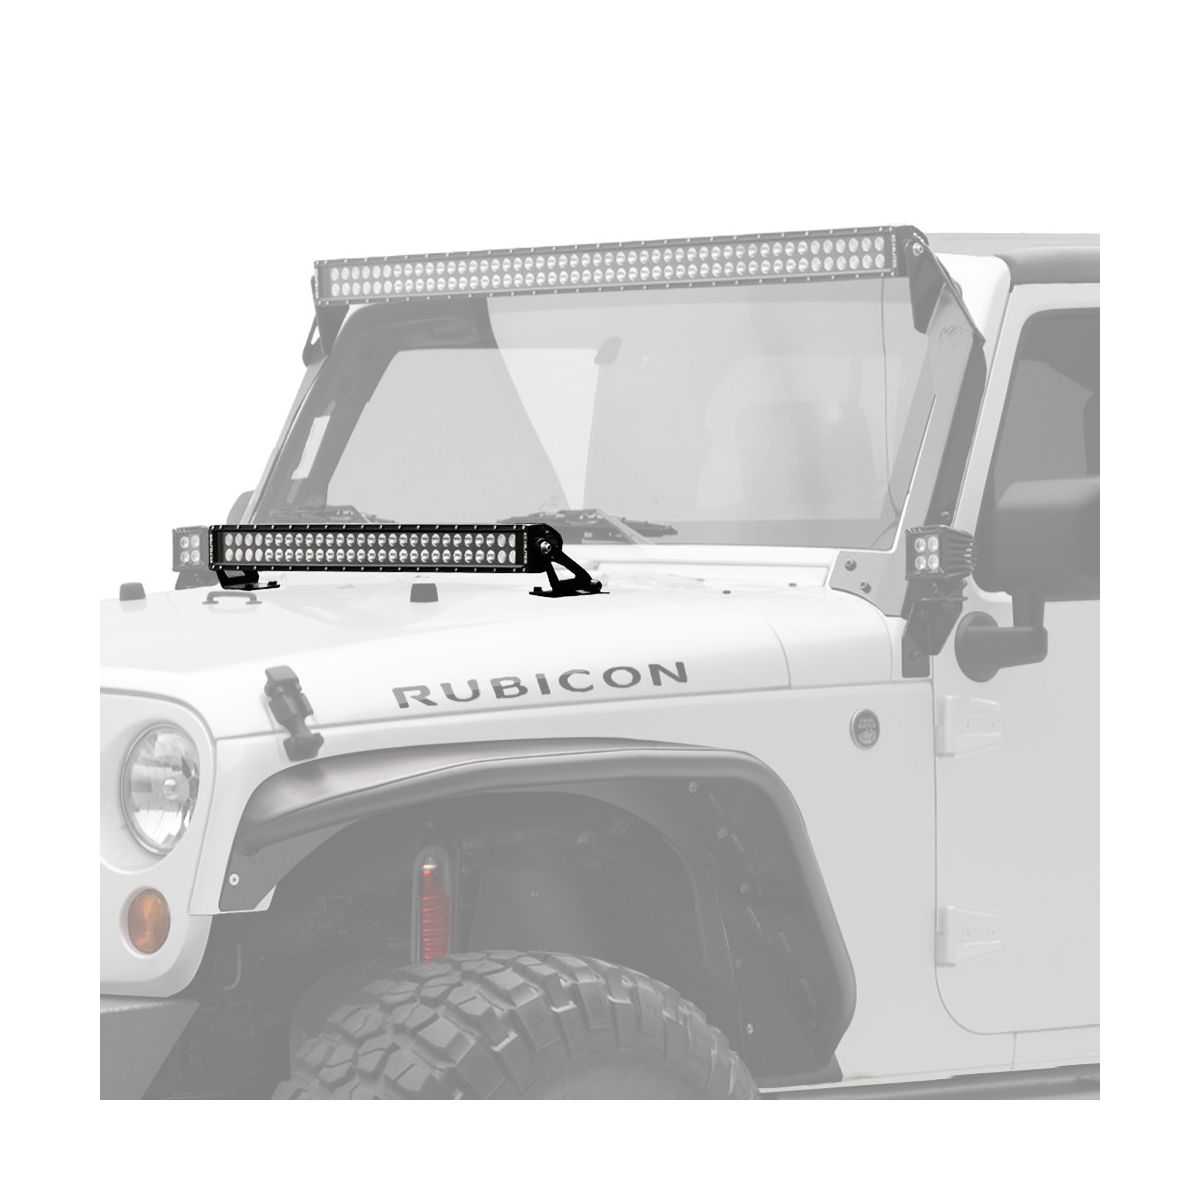 Discontinued - KC HiLiTES 30" C-SERIES C30 LED - LIGHT BAR SYSTEM - 180W COMBO SPOT / SPREAD BEAM - FOR 07-18 JEEP JK # 367